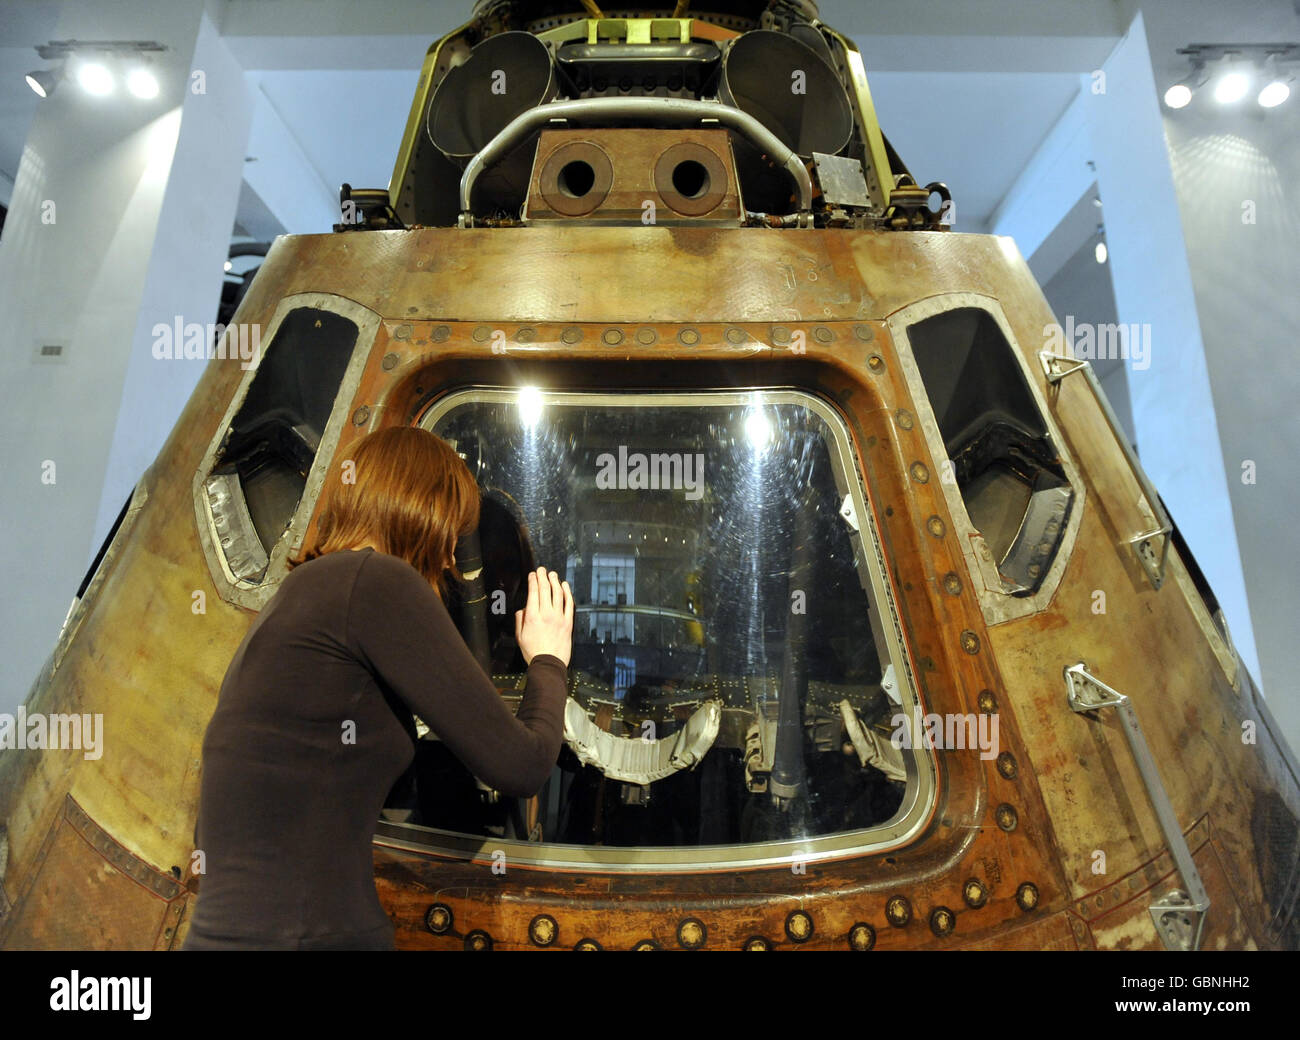 A staff member at the Science Museum in London, looks inside the Apollo 10 command module through the perspex cover which will be removed on Saturday May 23 so the public can see close inside for the first time. Stock Photo